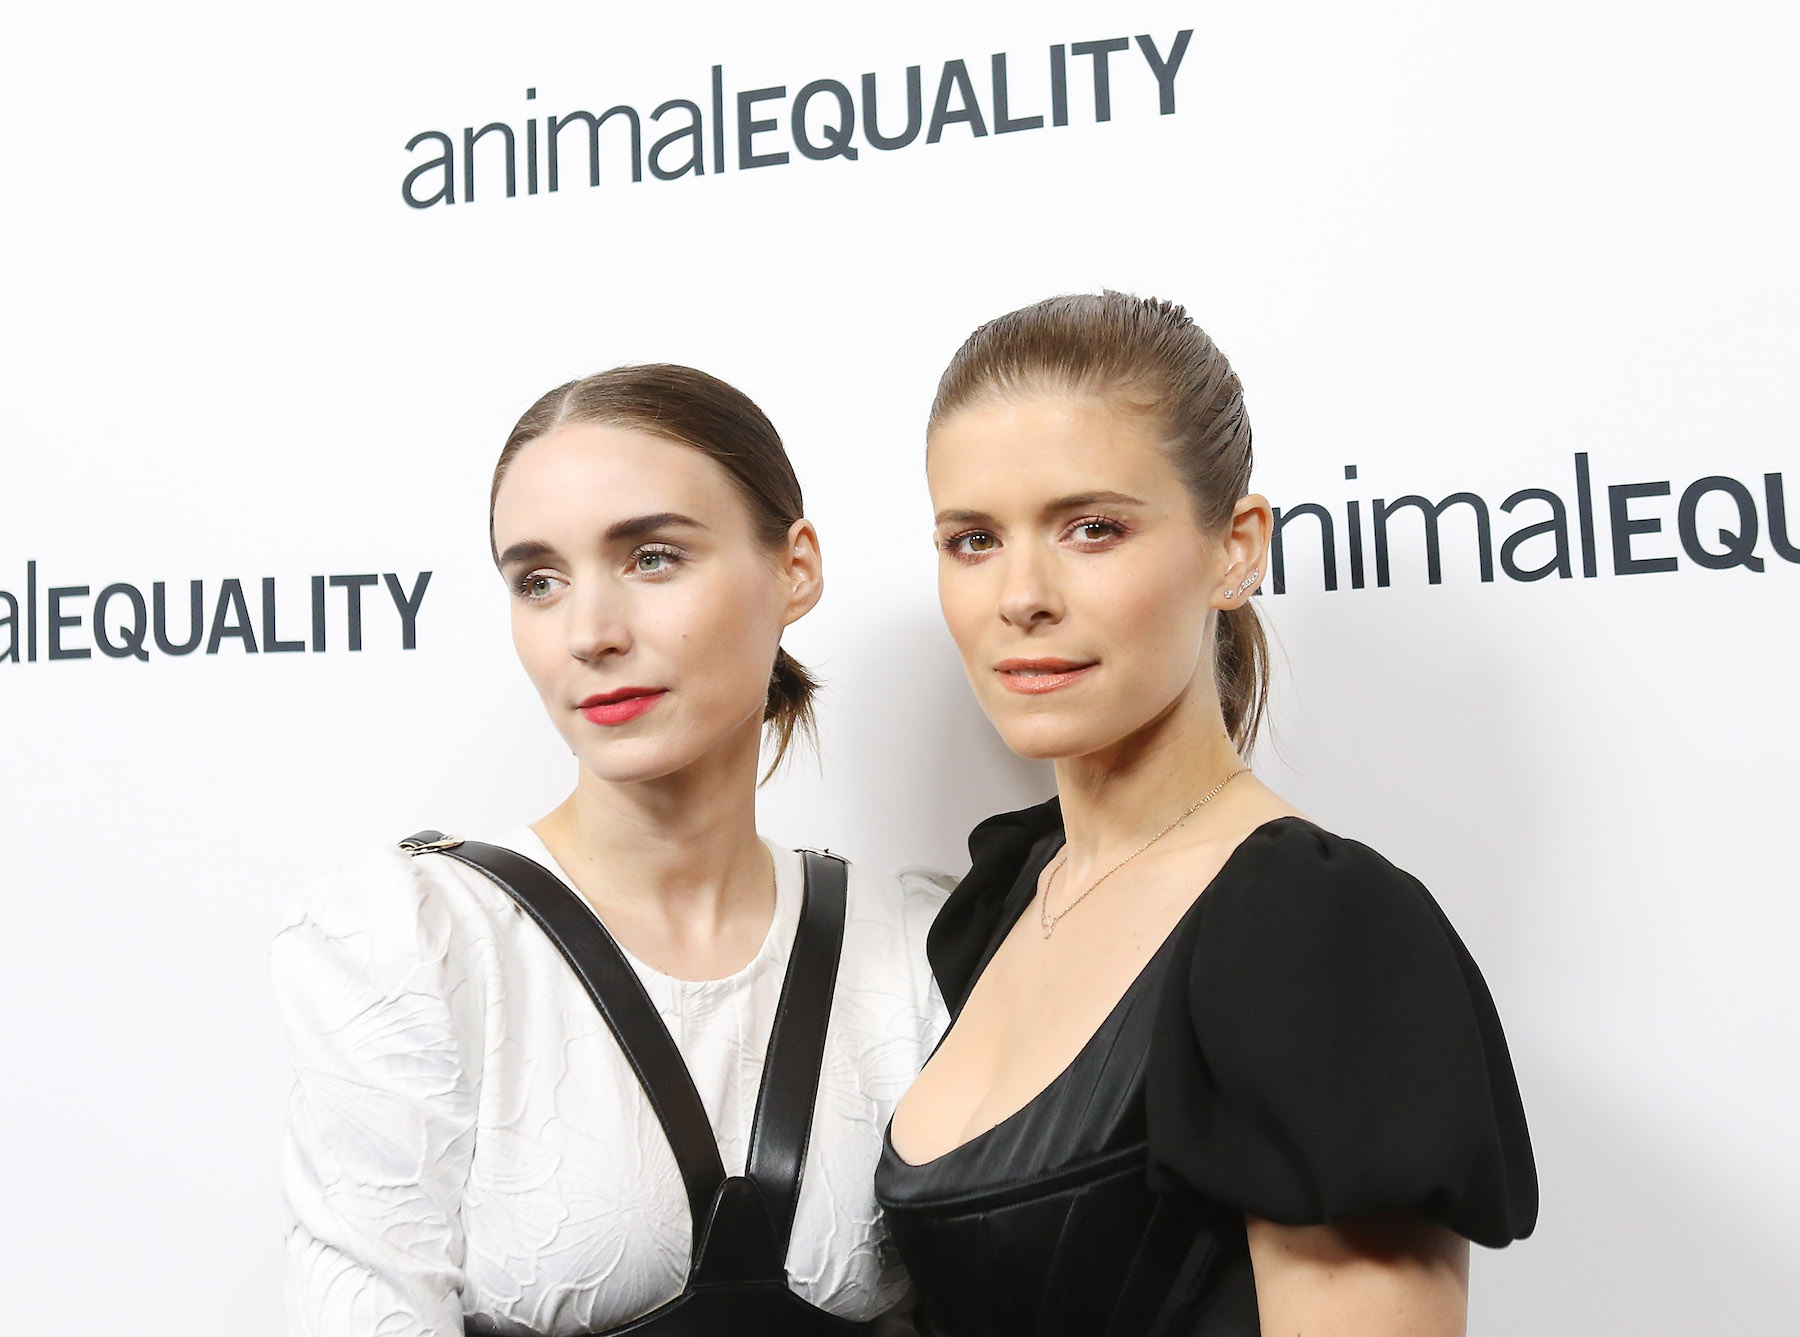 Rooney Mara and Kate Mara side by side at an event